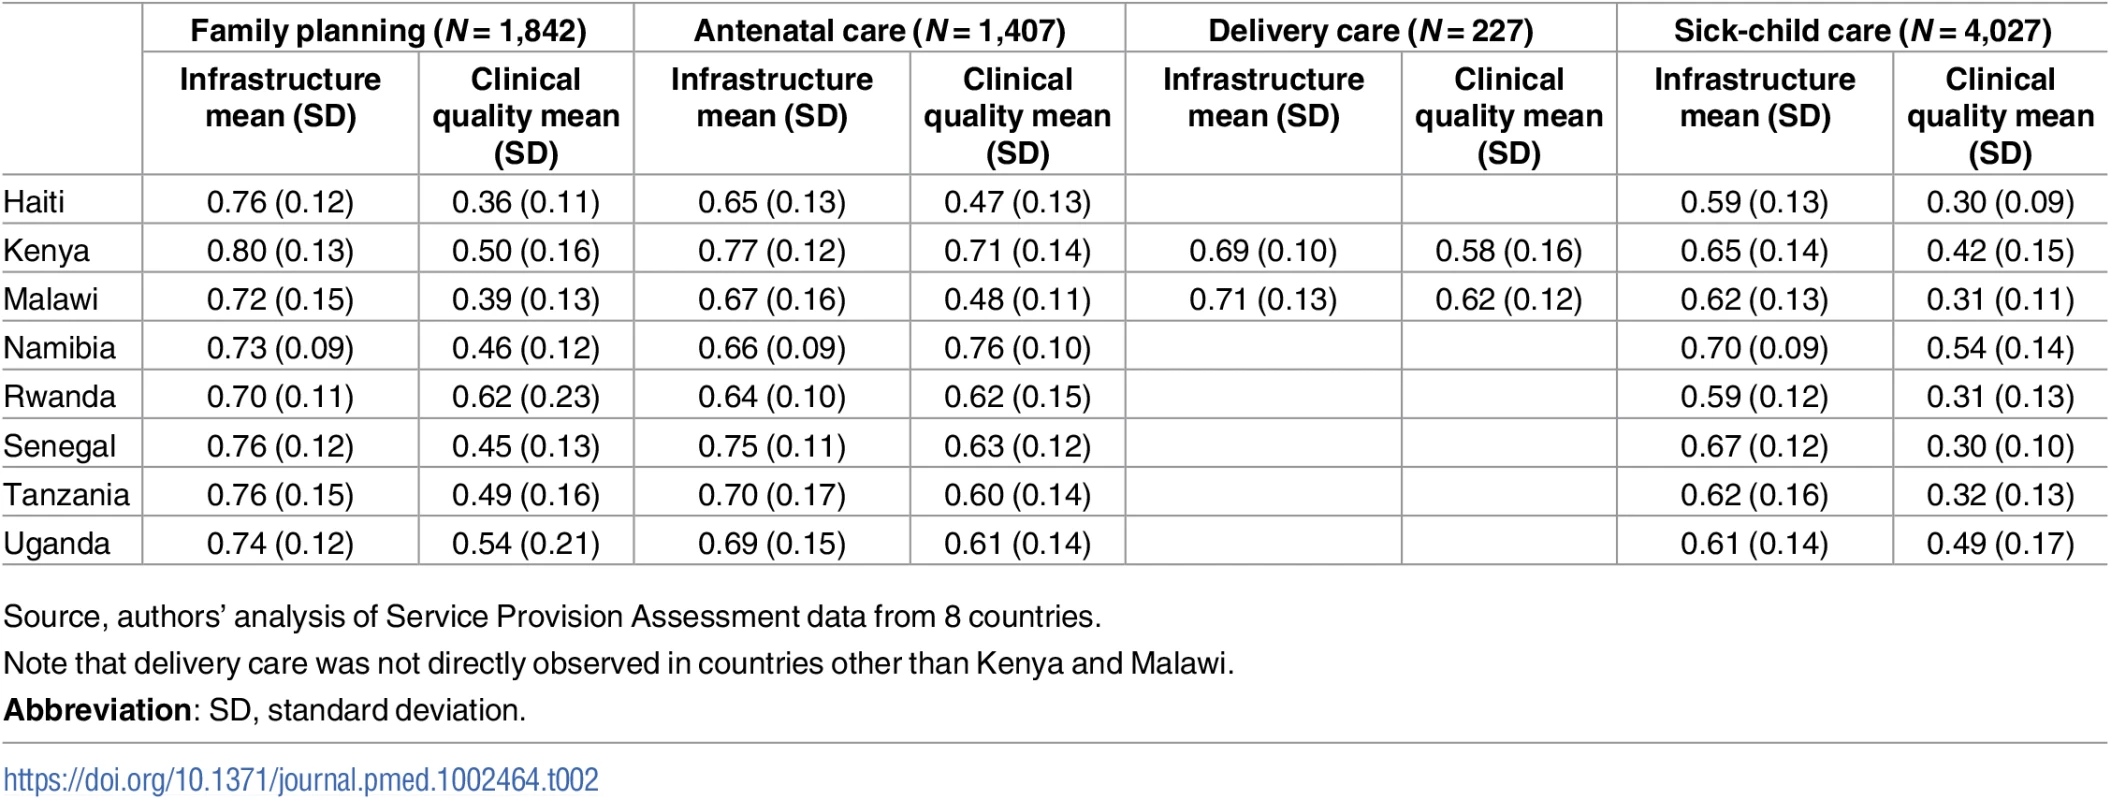 Summary statistics of infrastructure and observed clinical quality in facilities providing family planning, antenatal, sick-child, and delivery care.